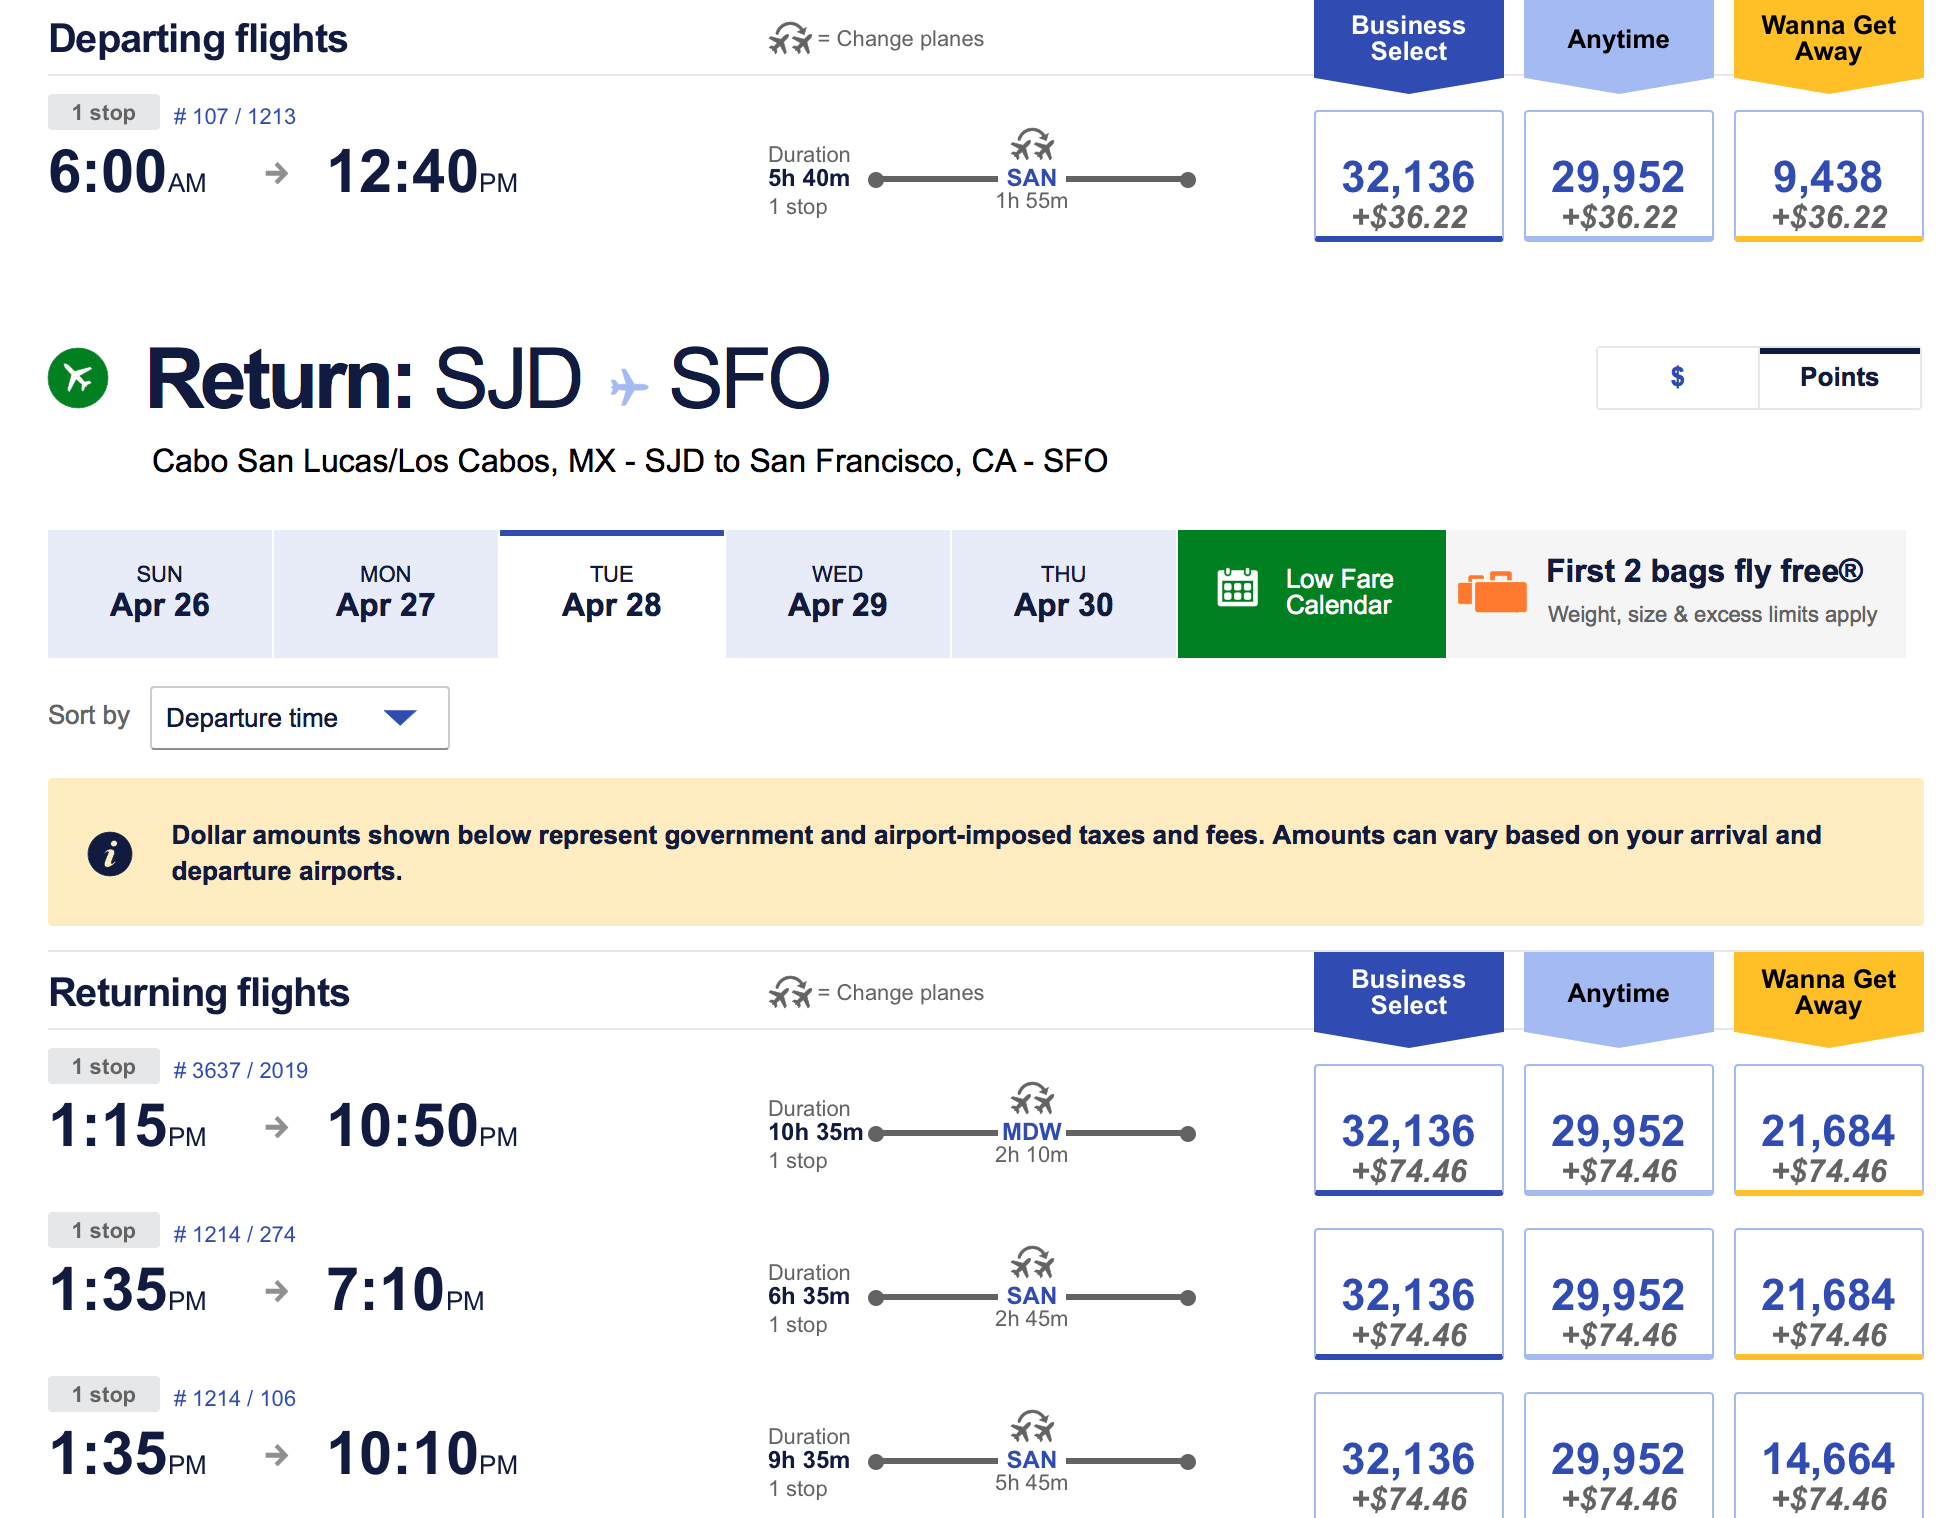 Screenshot of Southwest Airlines Redemption Chart